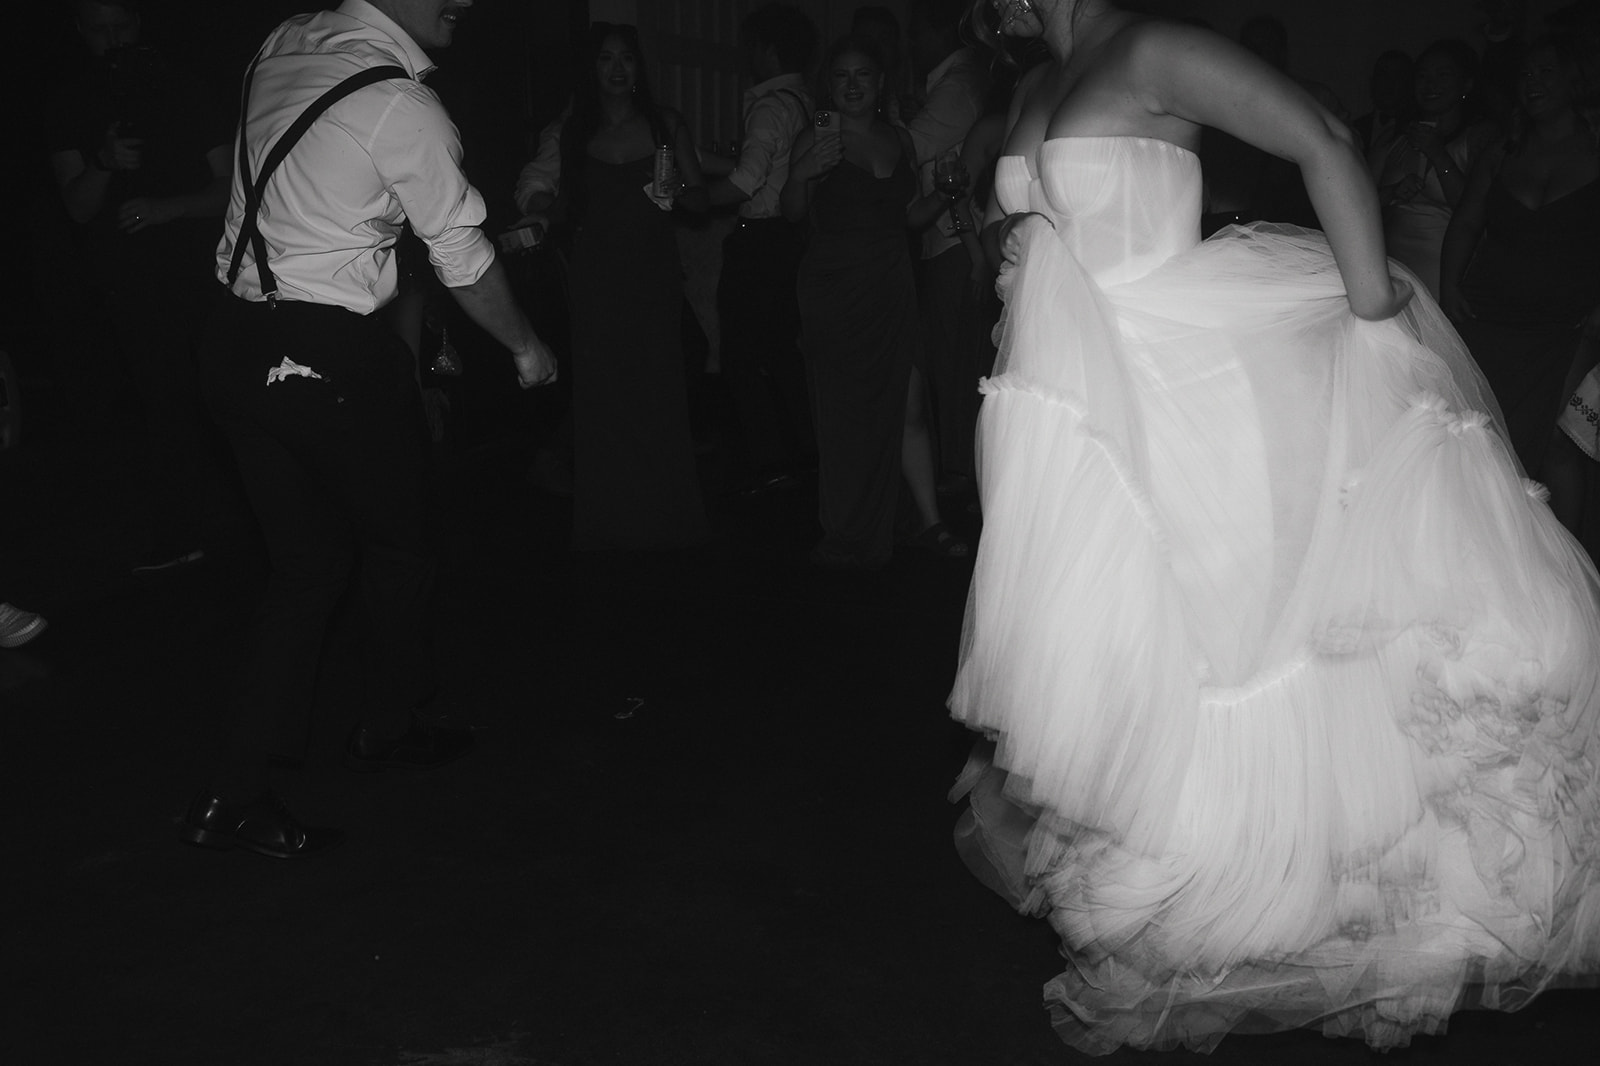 Black and white photo of a bride and groom dancing together during their wedding reception